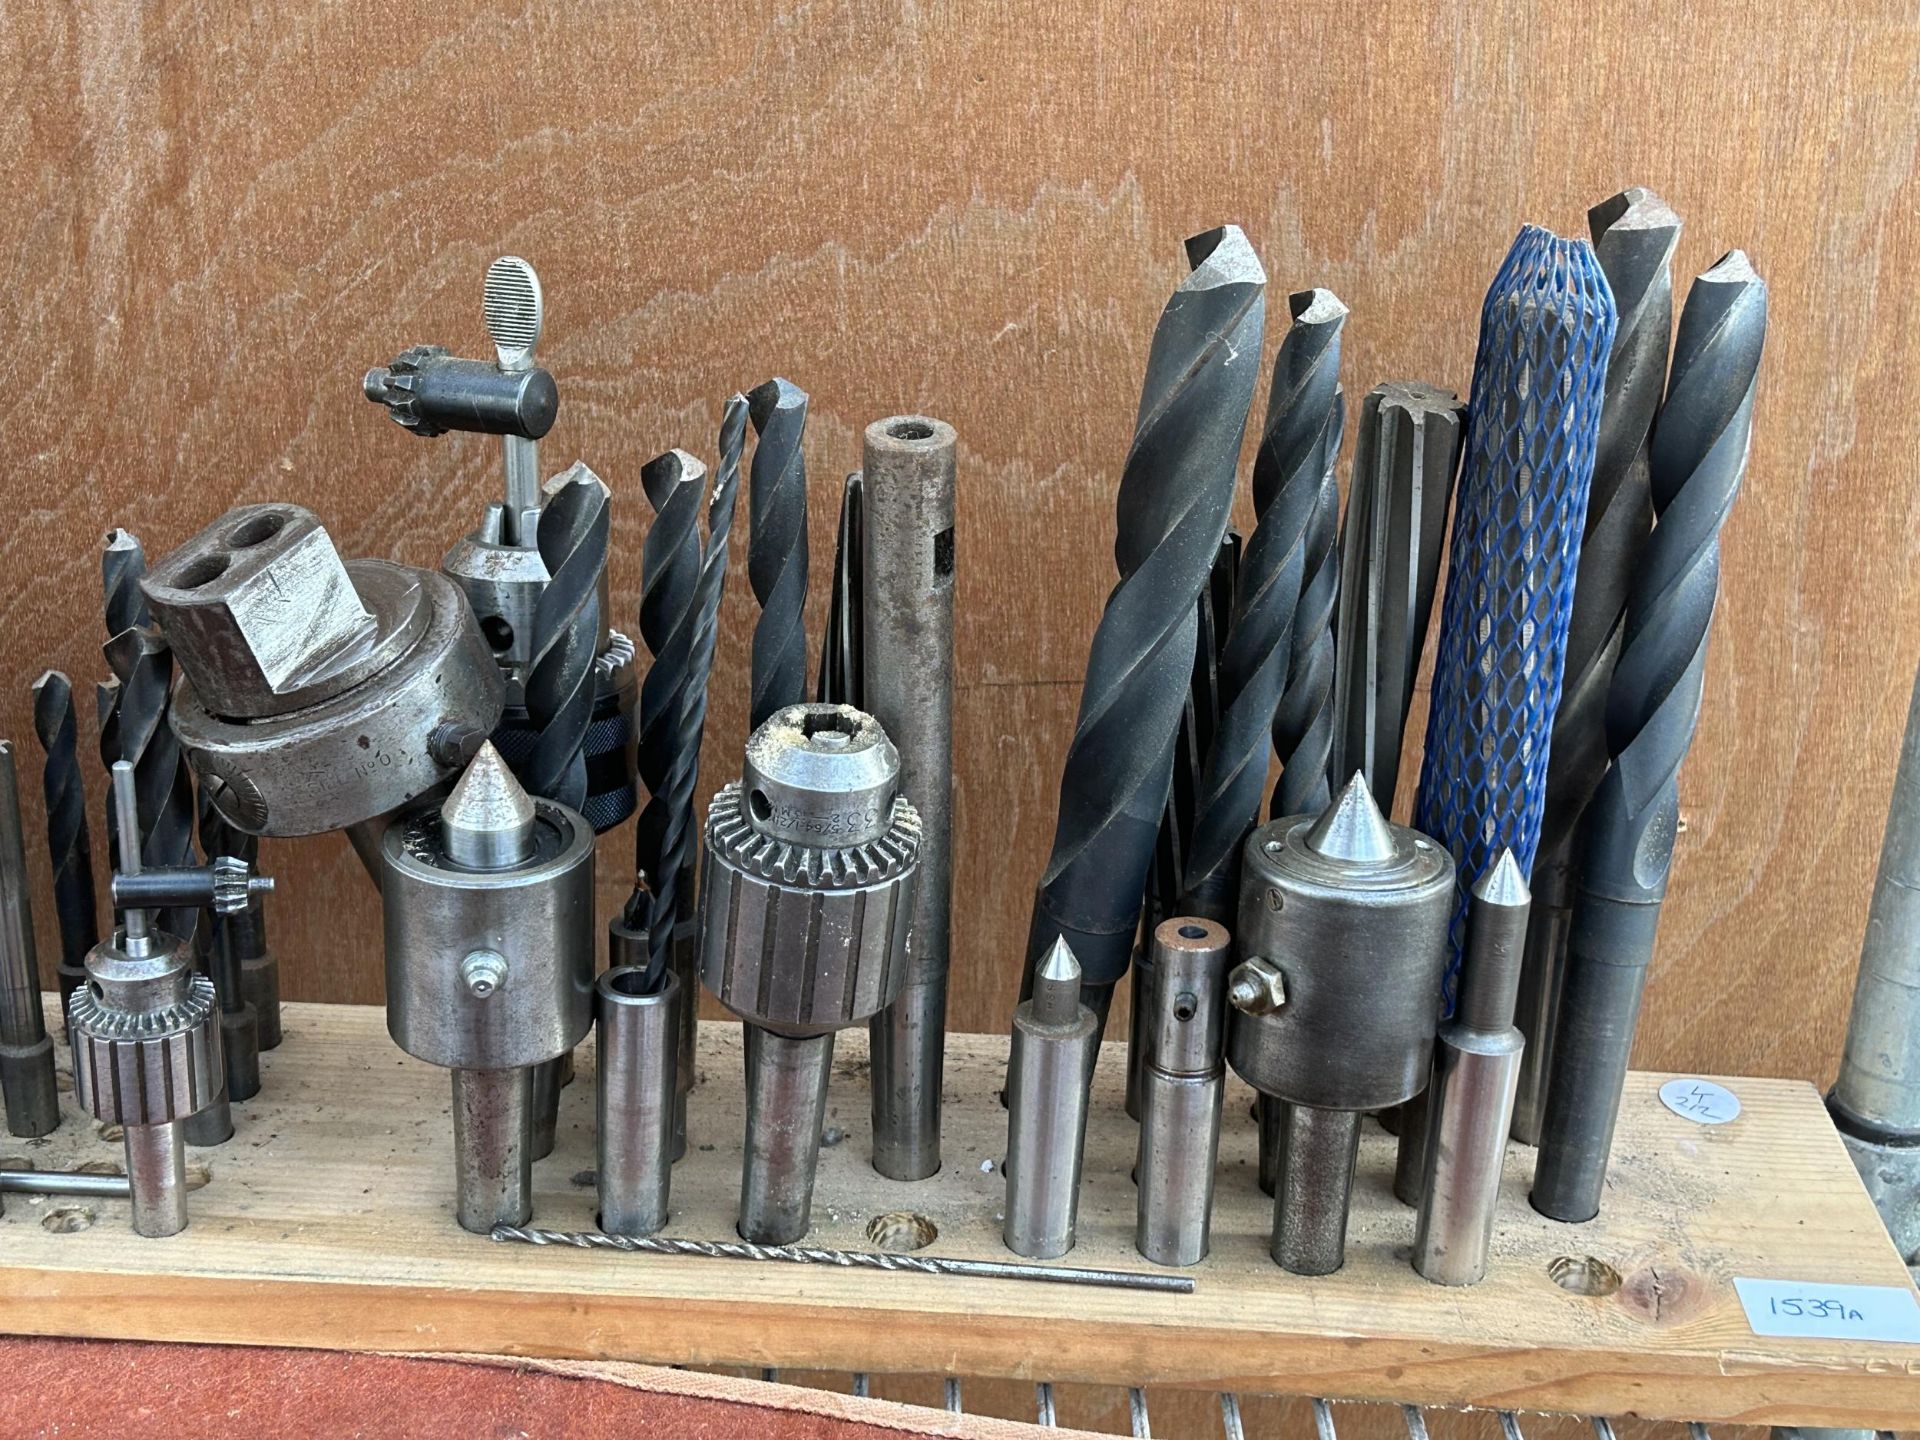 A LARGE ASSORTMENT OF DRILL BITS AND DRILL CHUCKS - Image 3 of 3